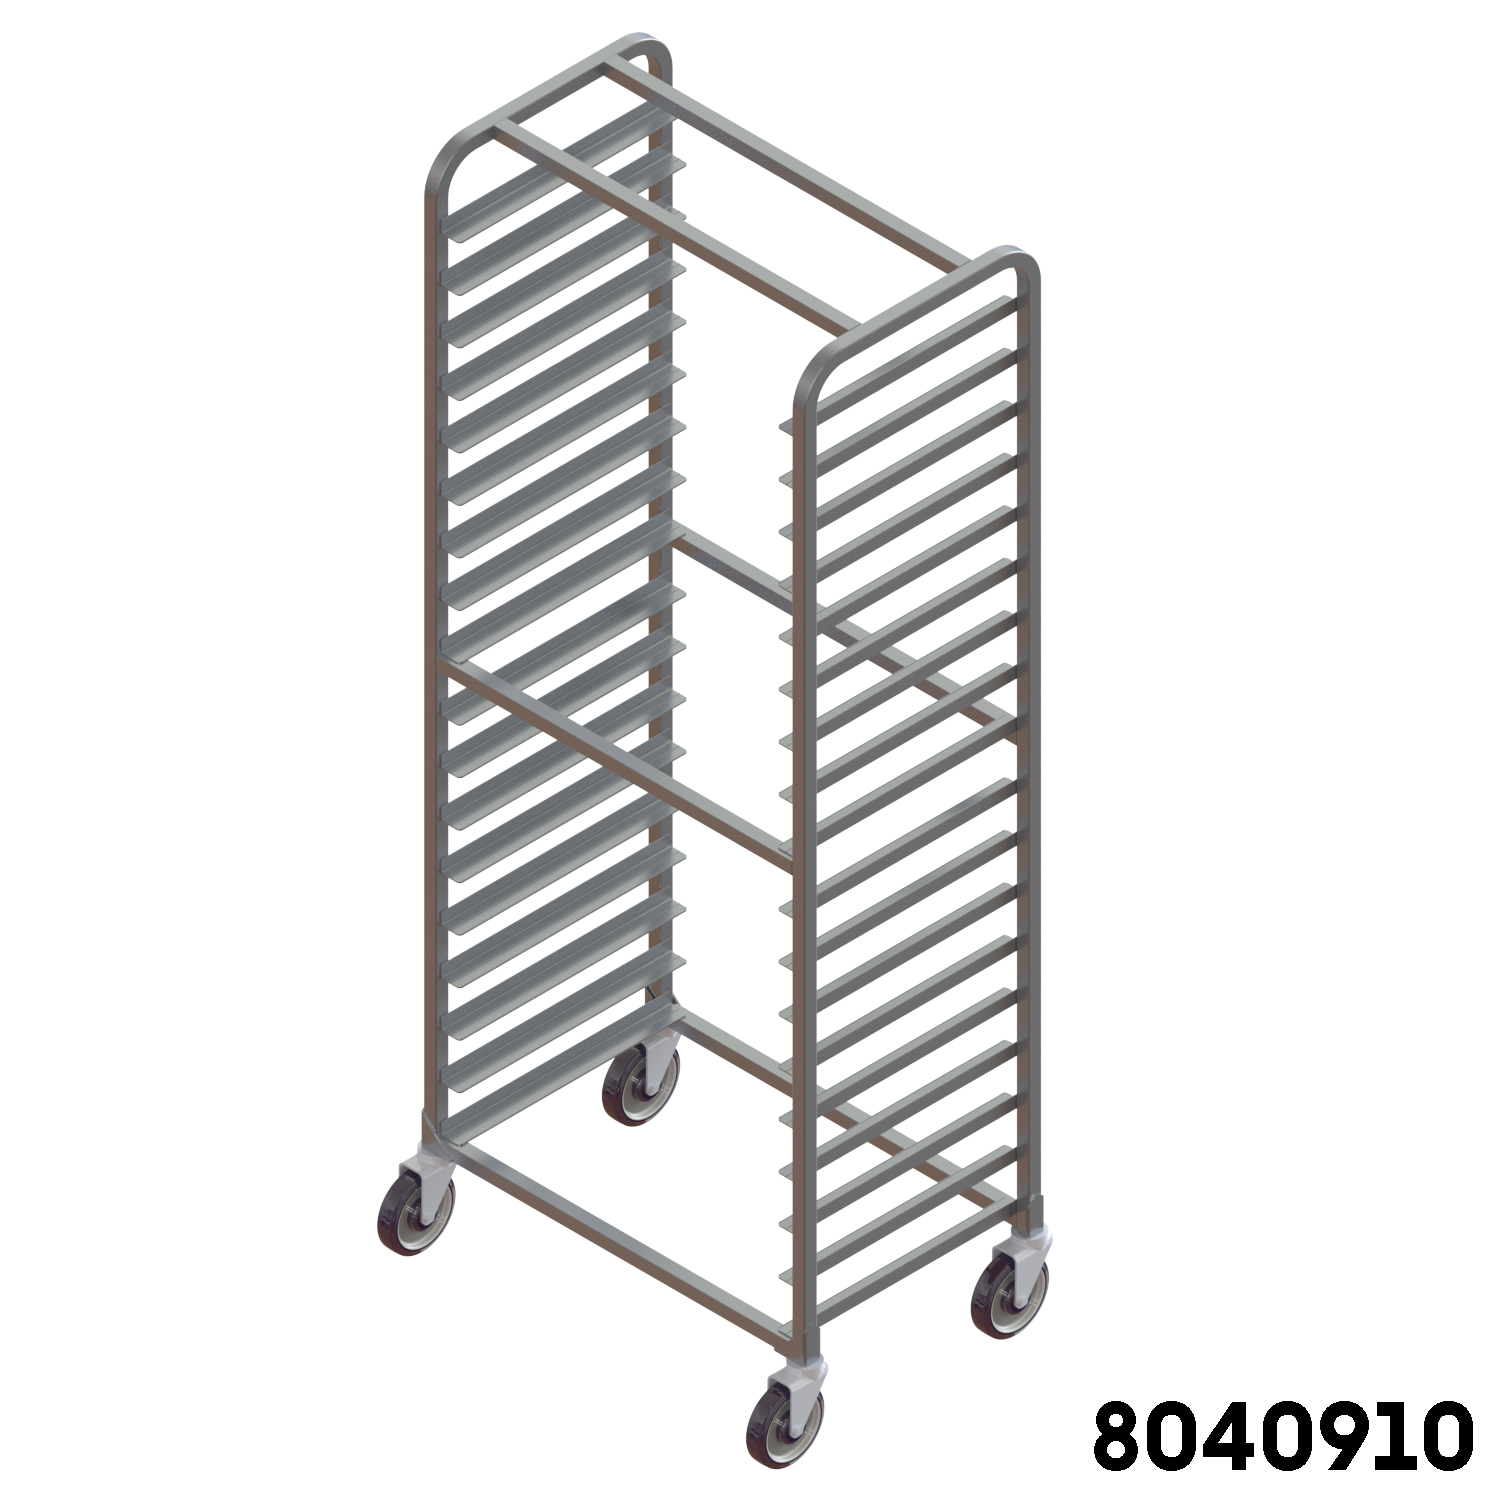 nest dollies industrial cart nesting picking cart NSF cart NSF rack NSF approved NSF certified National Sanitation Foundation tray shelf Distribution Cart picking cart tray shelf picking cart, picking cart, ecom cart, ecommerce cart, ecommerce picking cart, picking cart, INDUSTRIAL CARTS, grocery cart grocery picking cart, department store cart, beverage cart NSF approved. This food service cart meets strict standards and procedures imposed by NSF. lug cart meat department, produce department